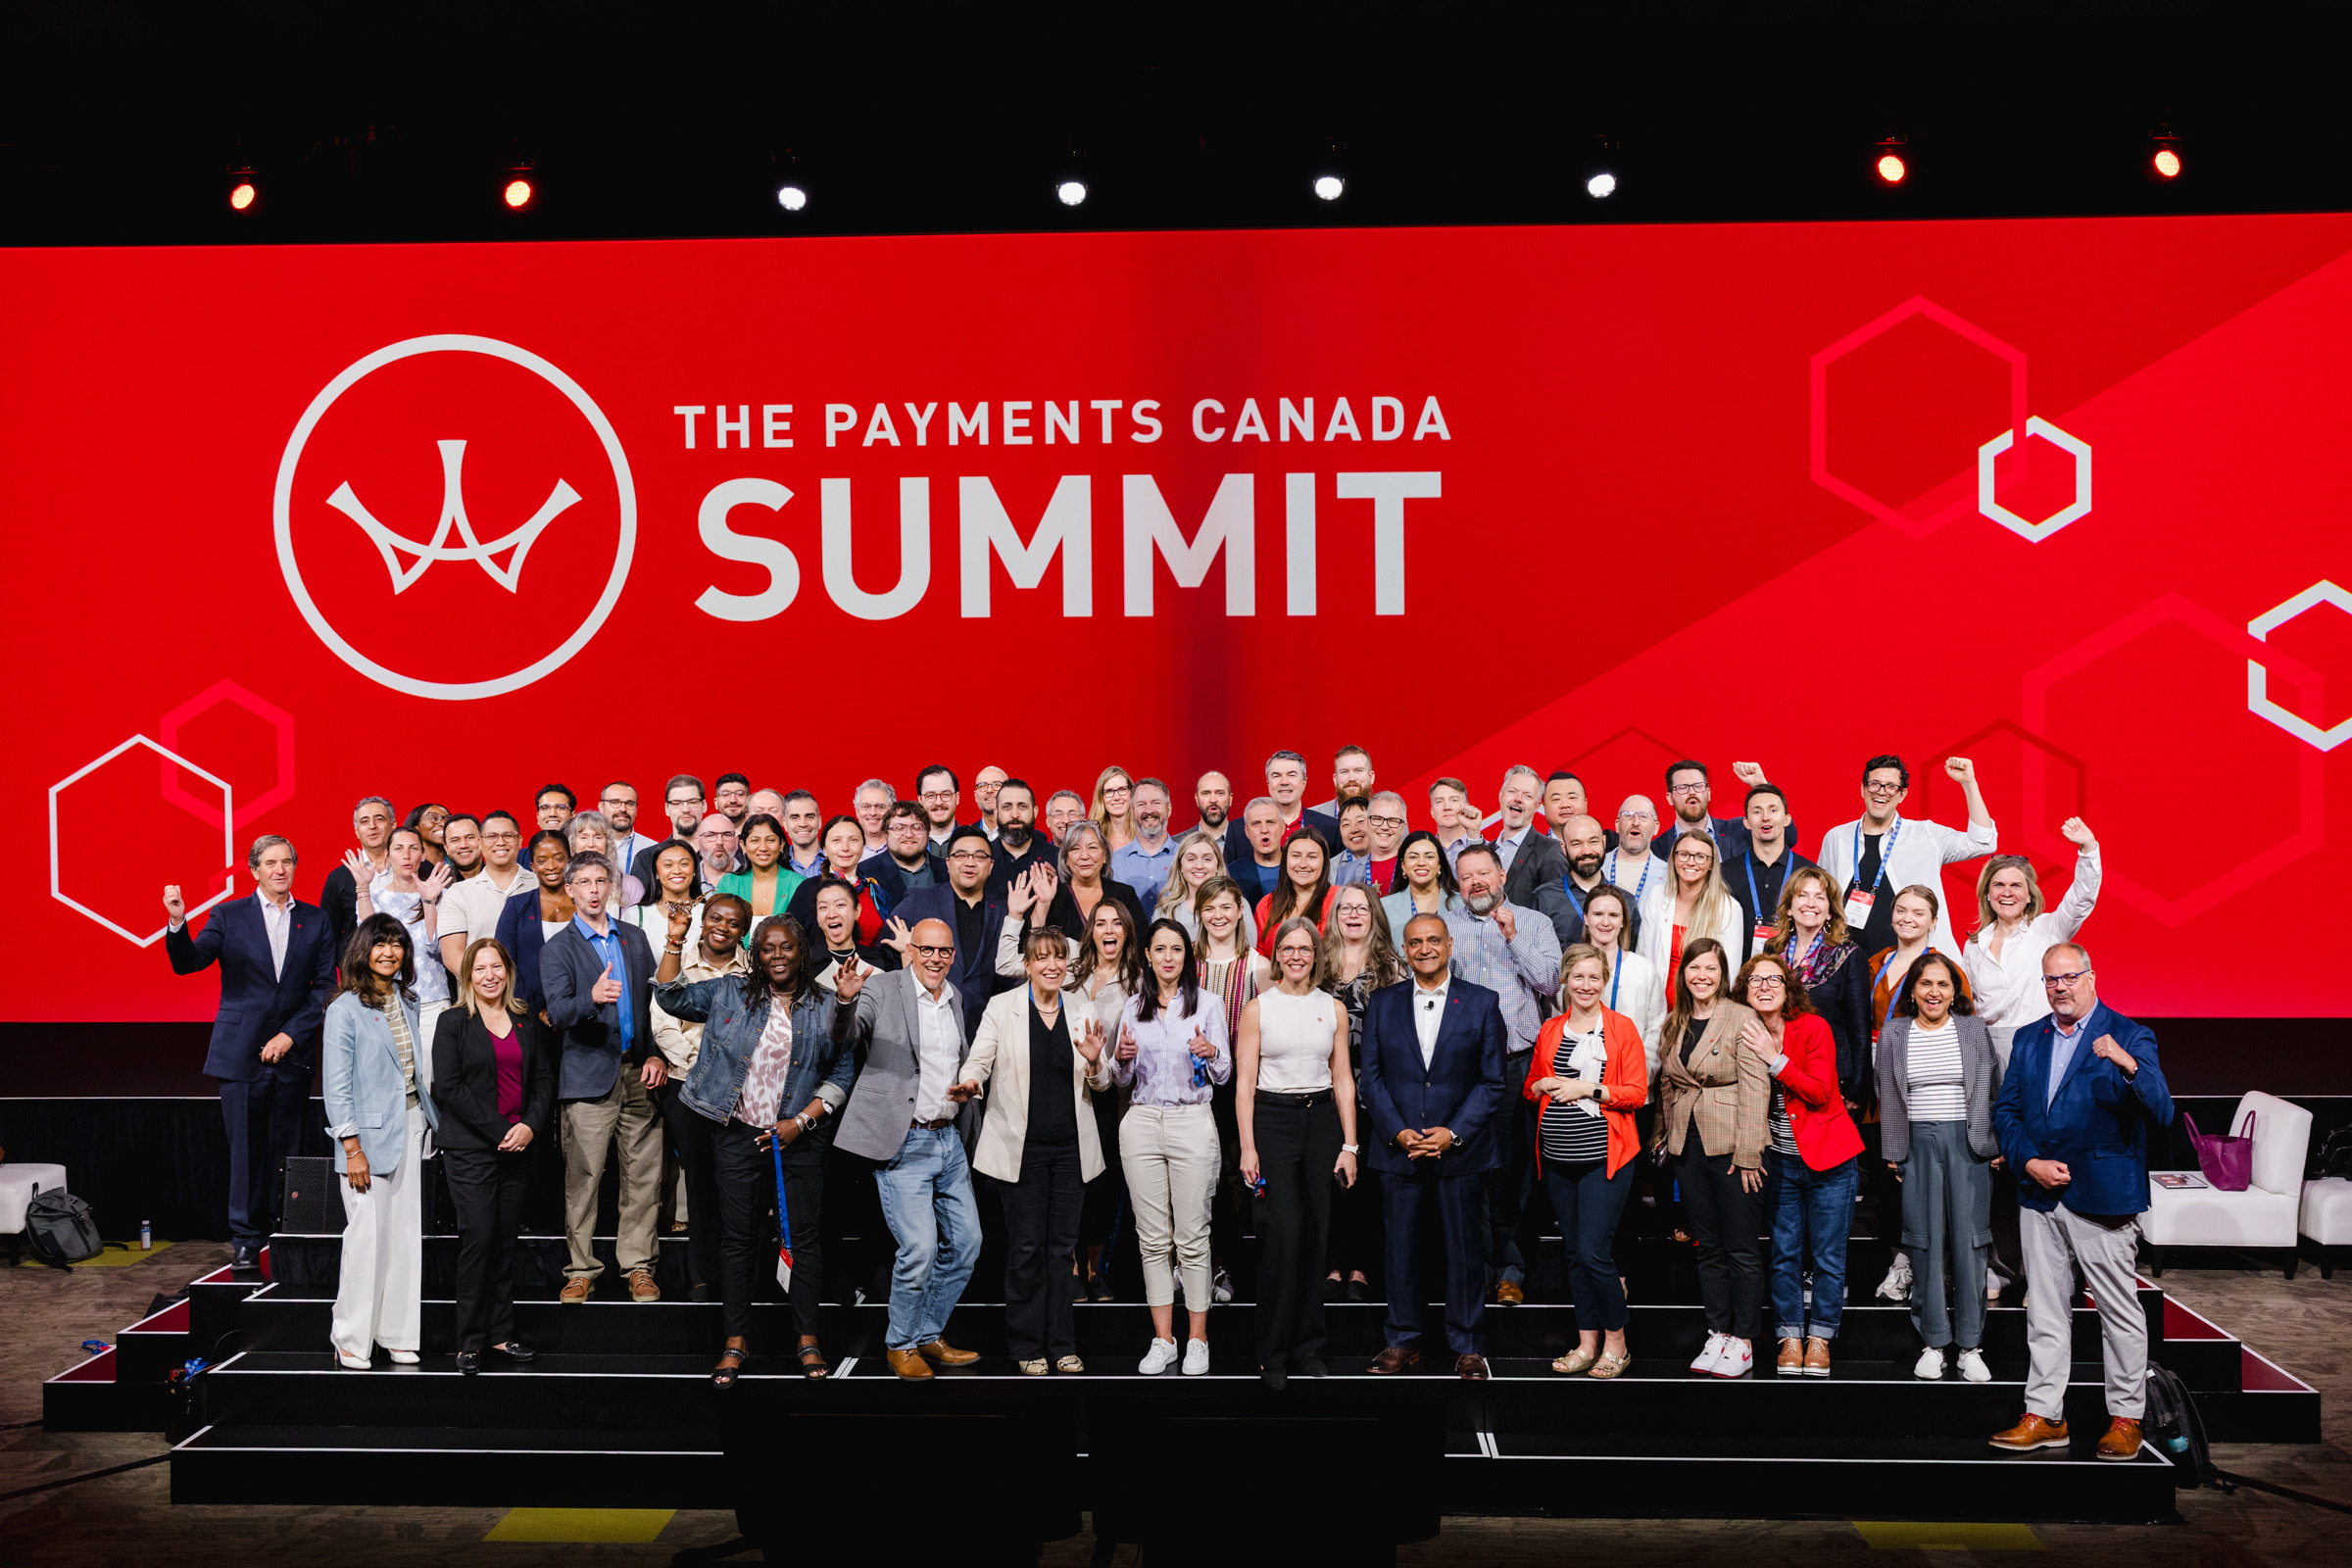 A diverse group of people poses on stage in front of a red backdrop that reads "The Payments Canada Summit," captured perfectly in corporate photography style.